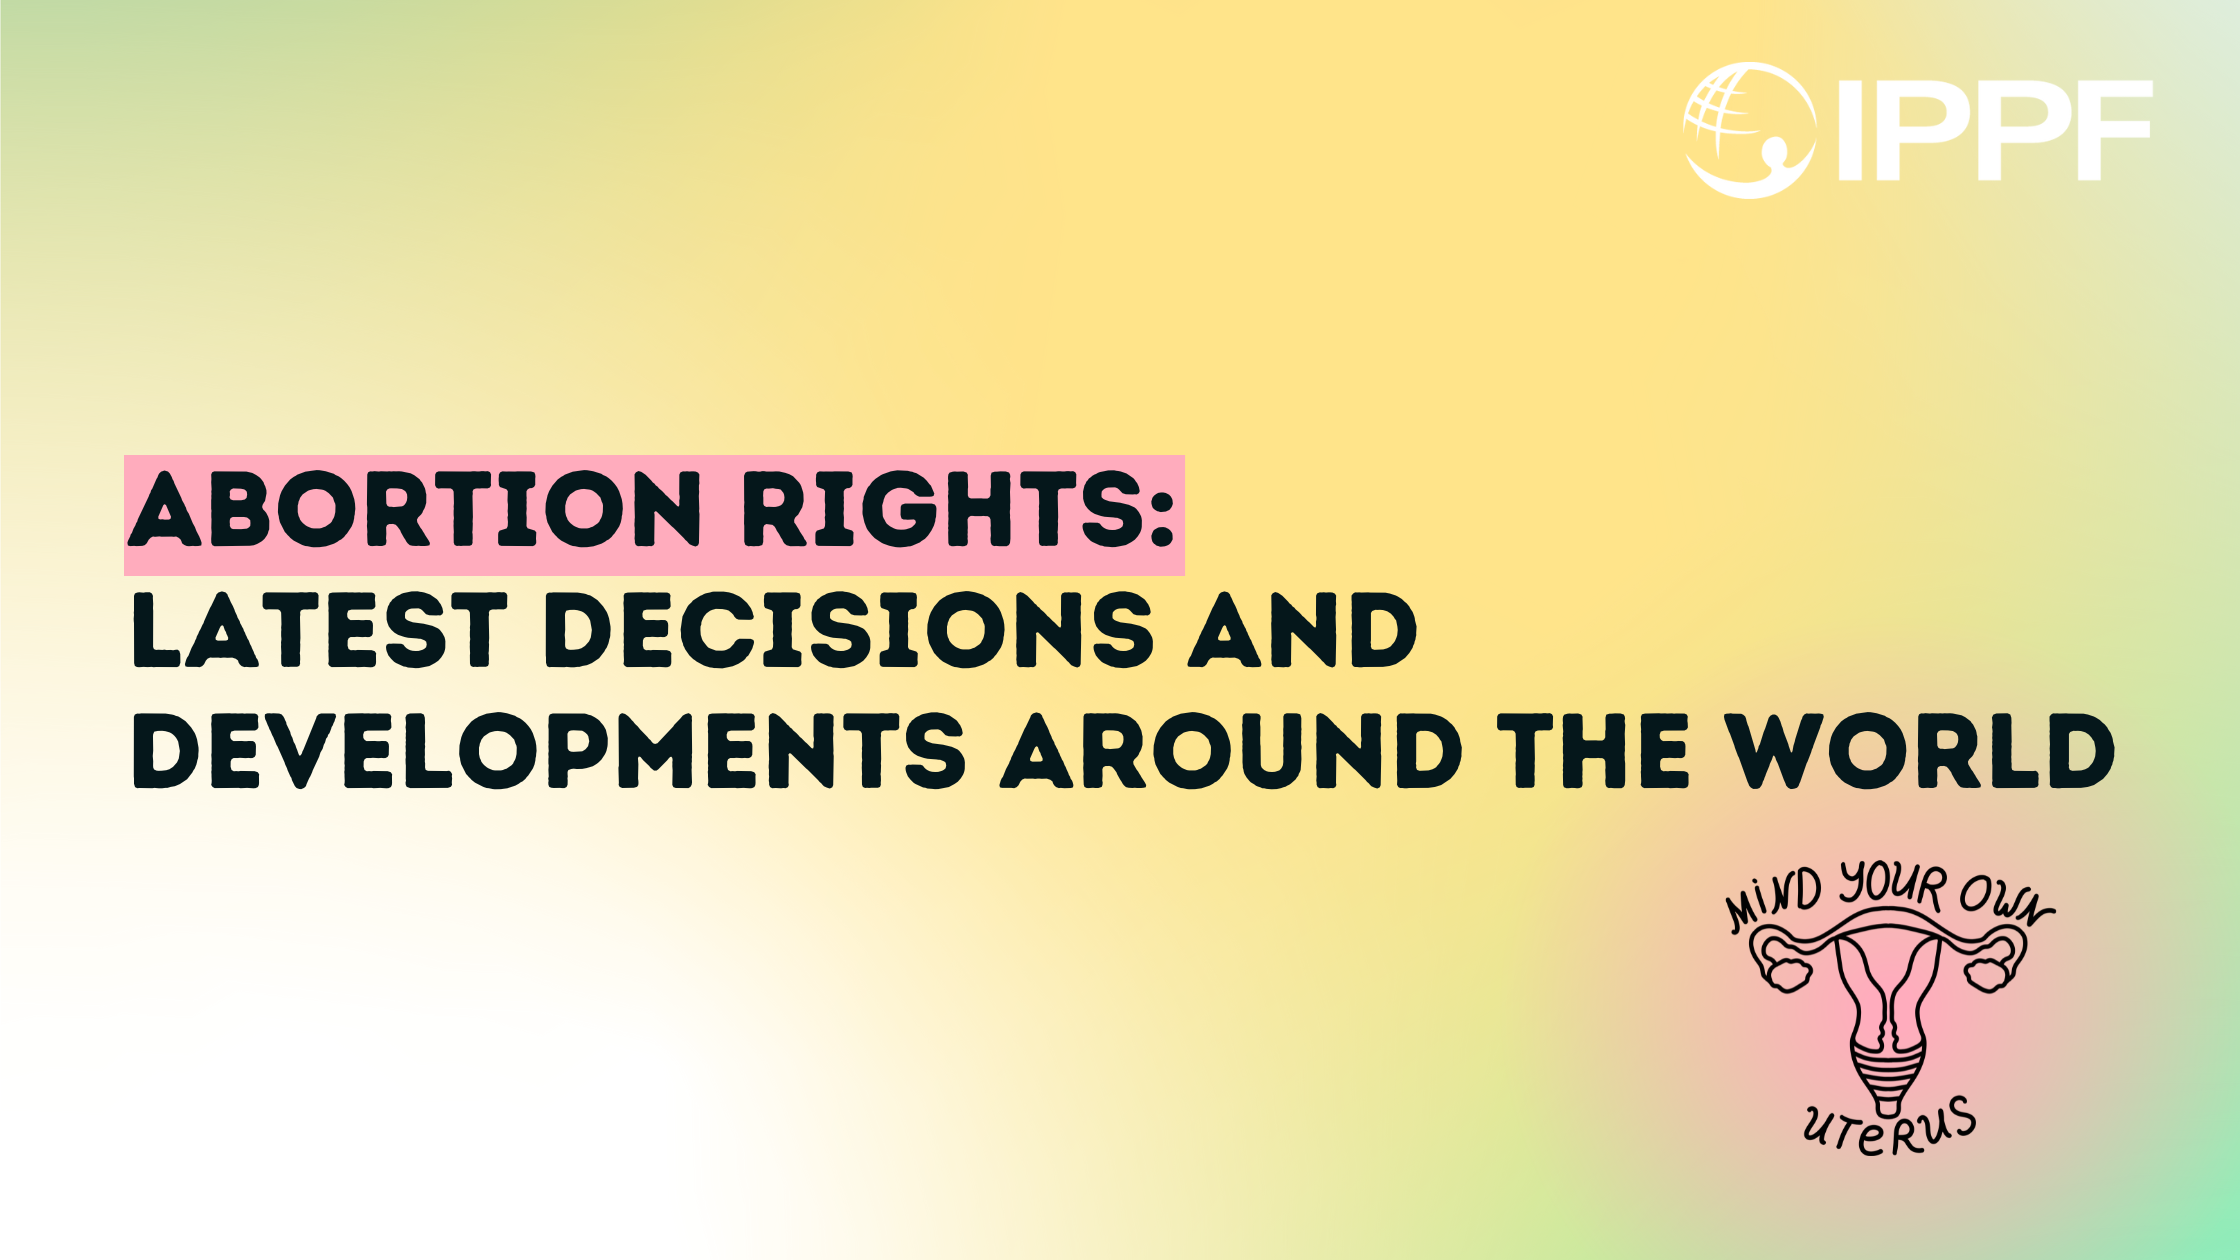 Abortion Rights: Latest Decisions and Developments around the World